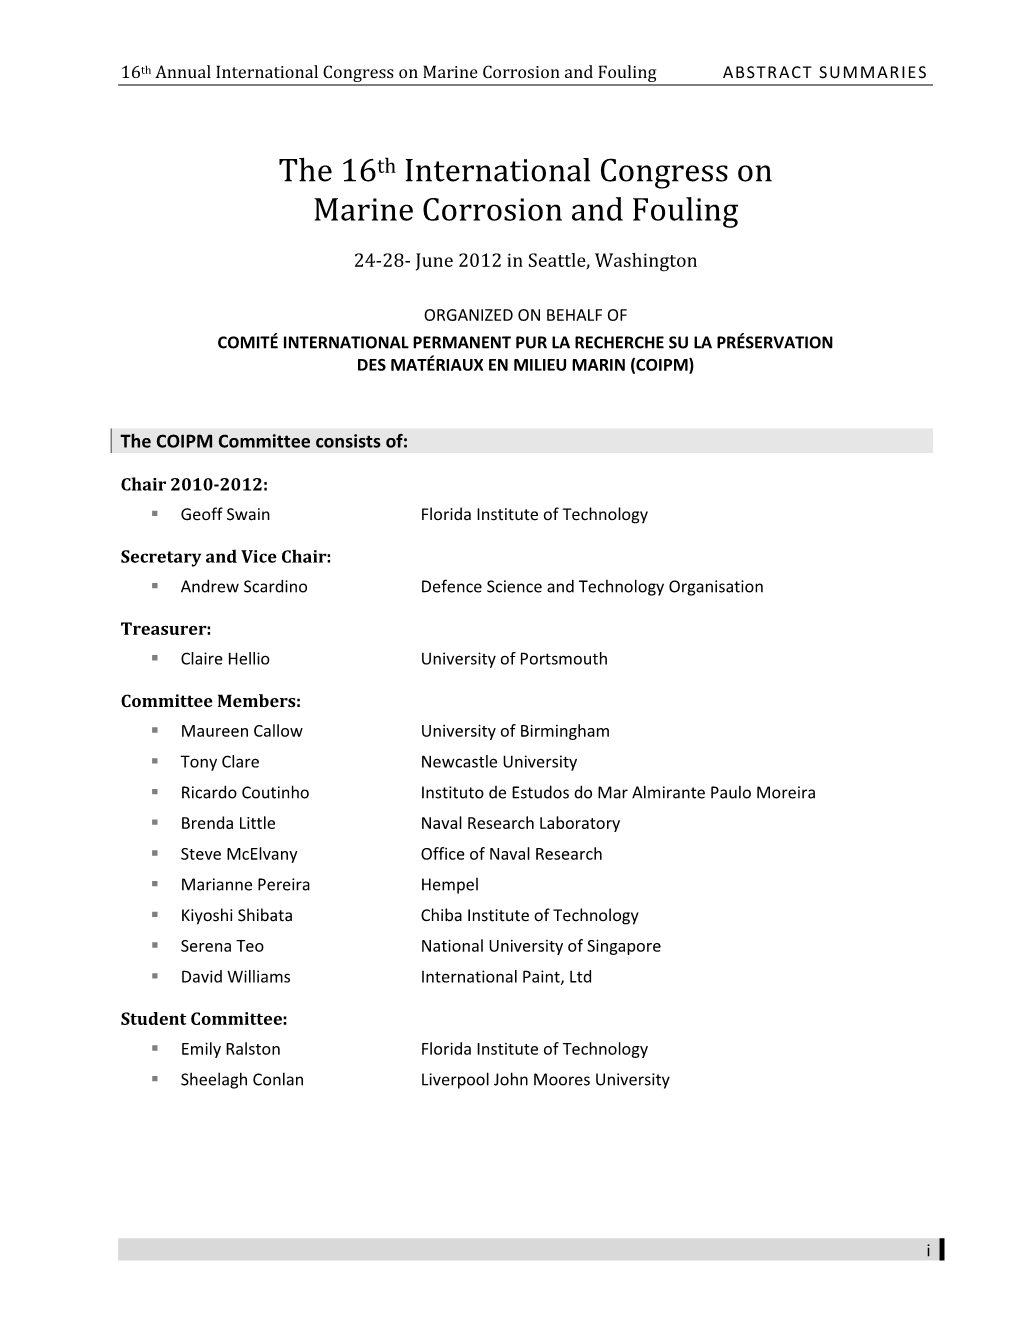 The 16Th International Congress on Marine Corrosion and Fouling